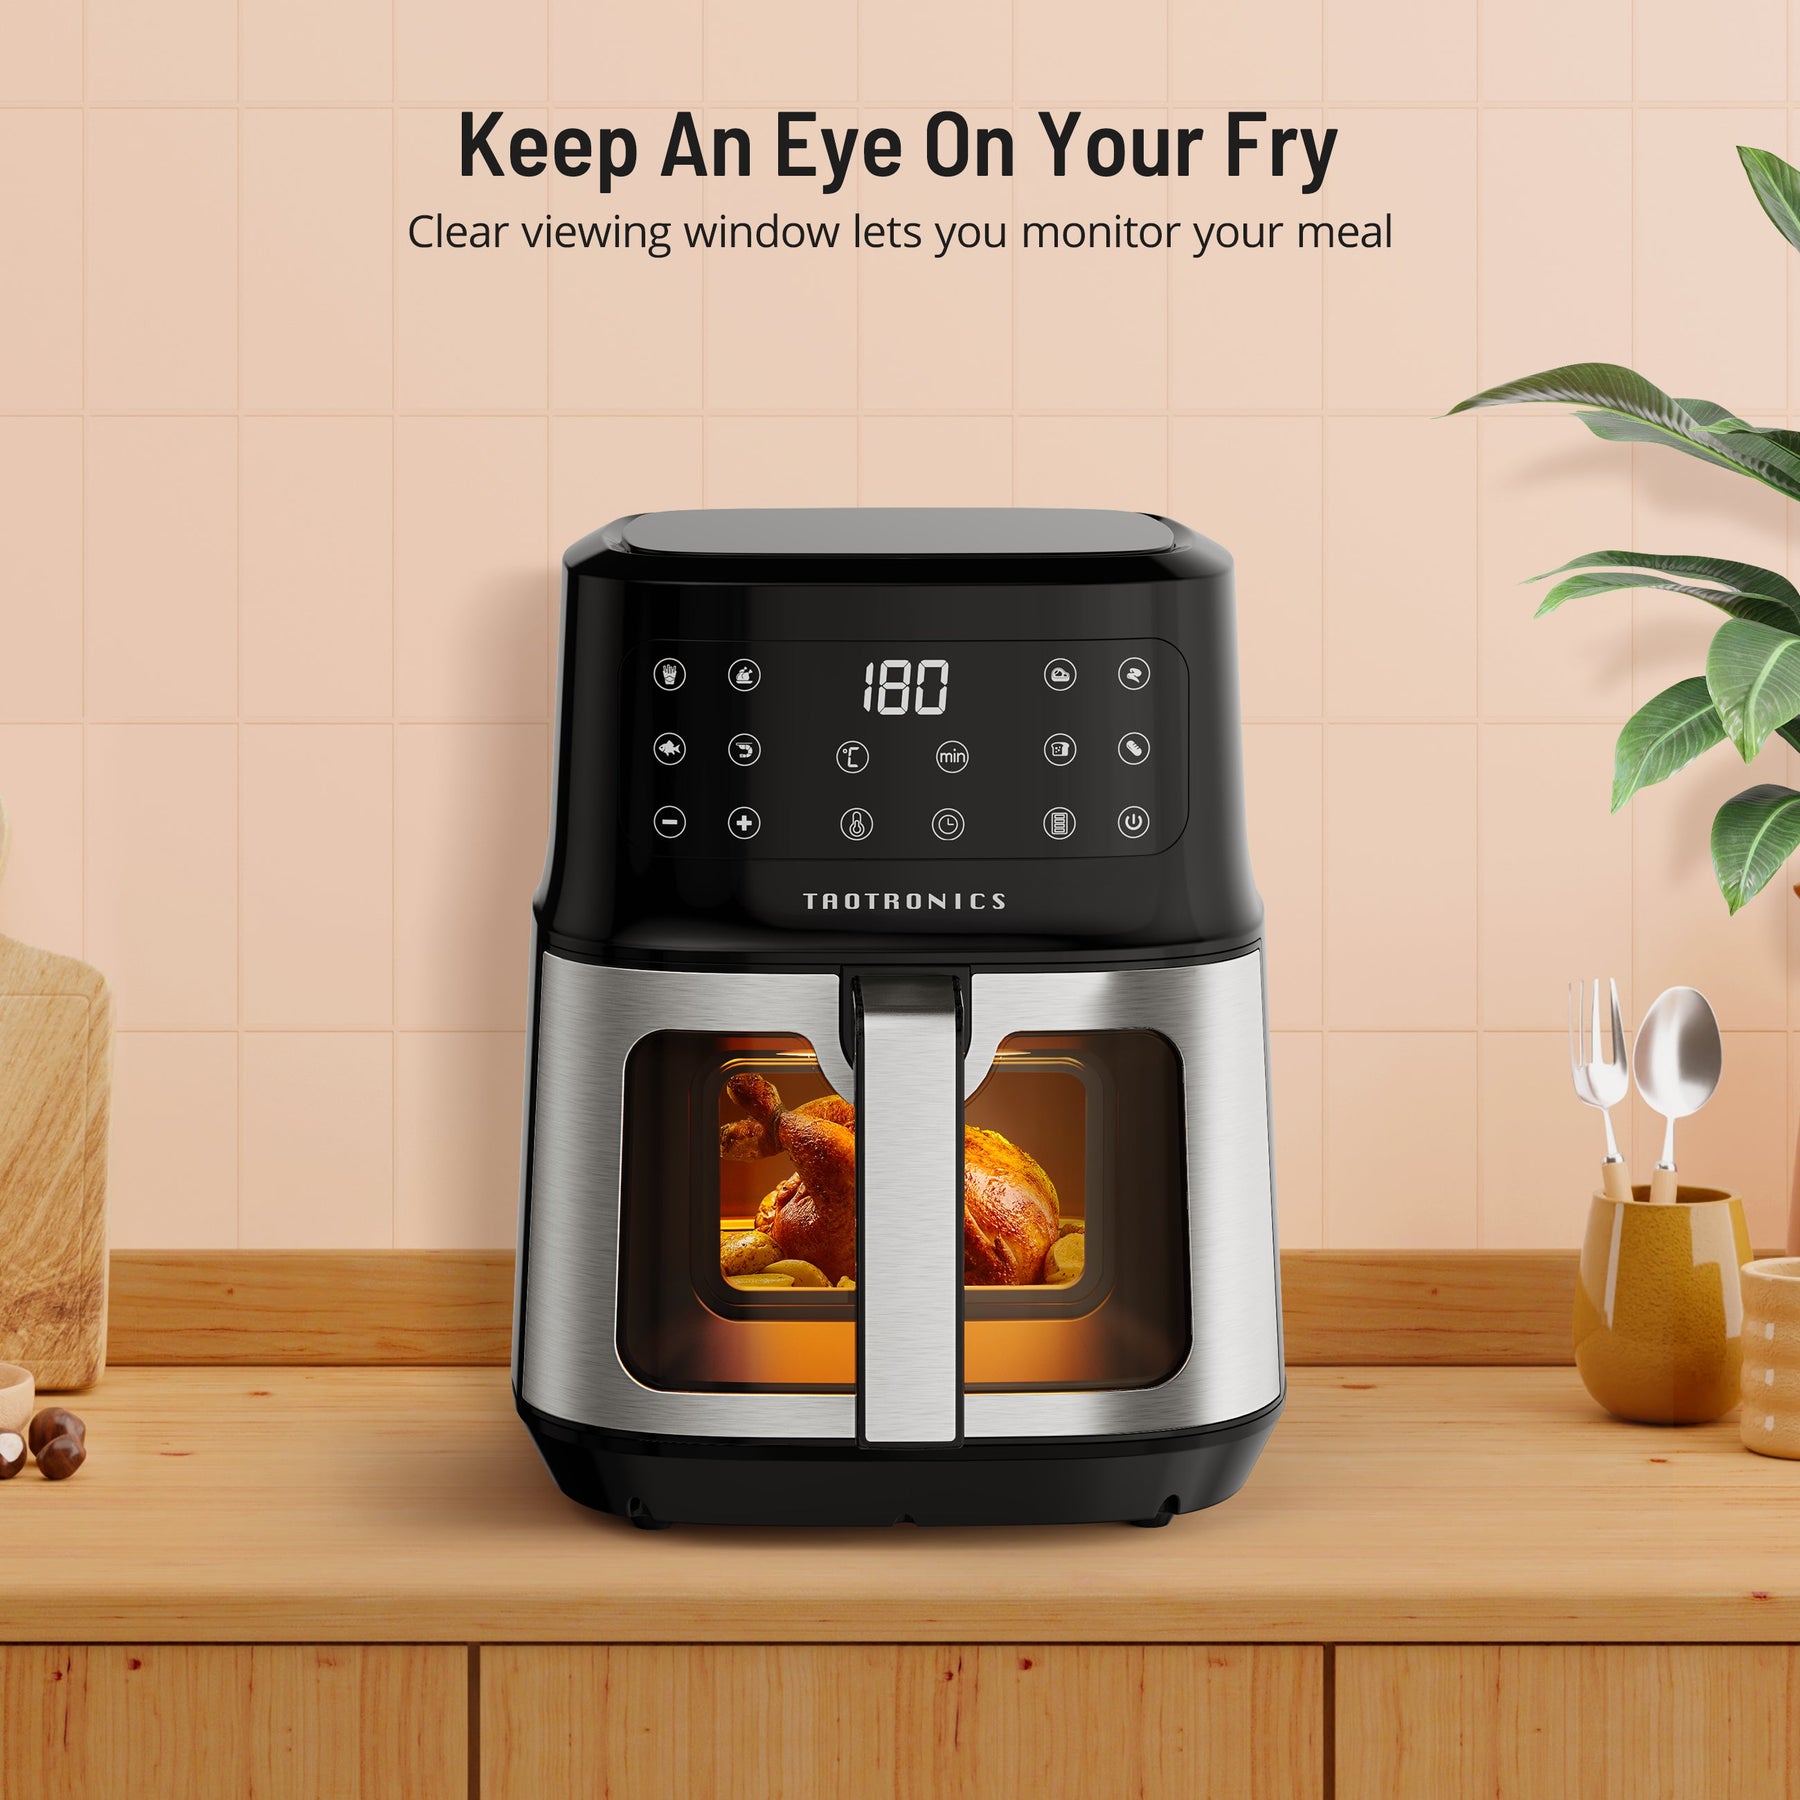 Symdral Air Fryer 003,5.3 Quart 8-in-1 Compact Air Fryers with Visible Cooking Window